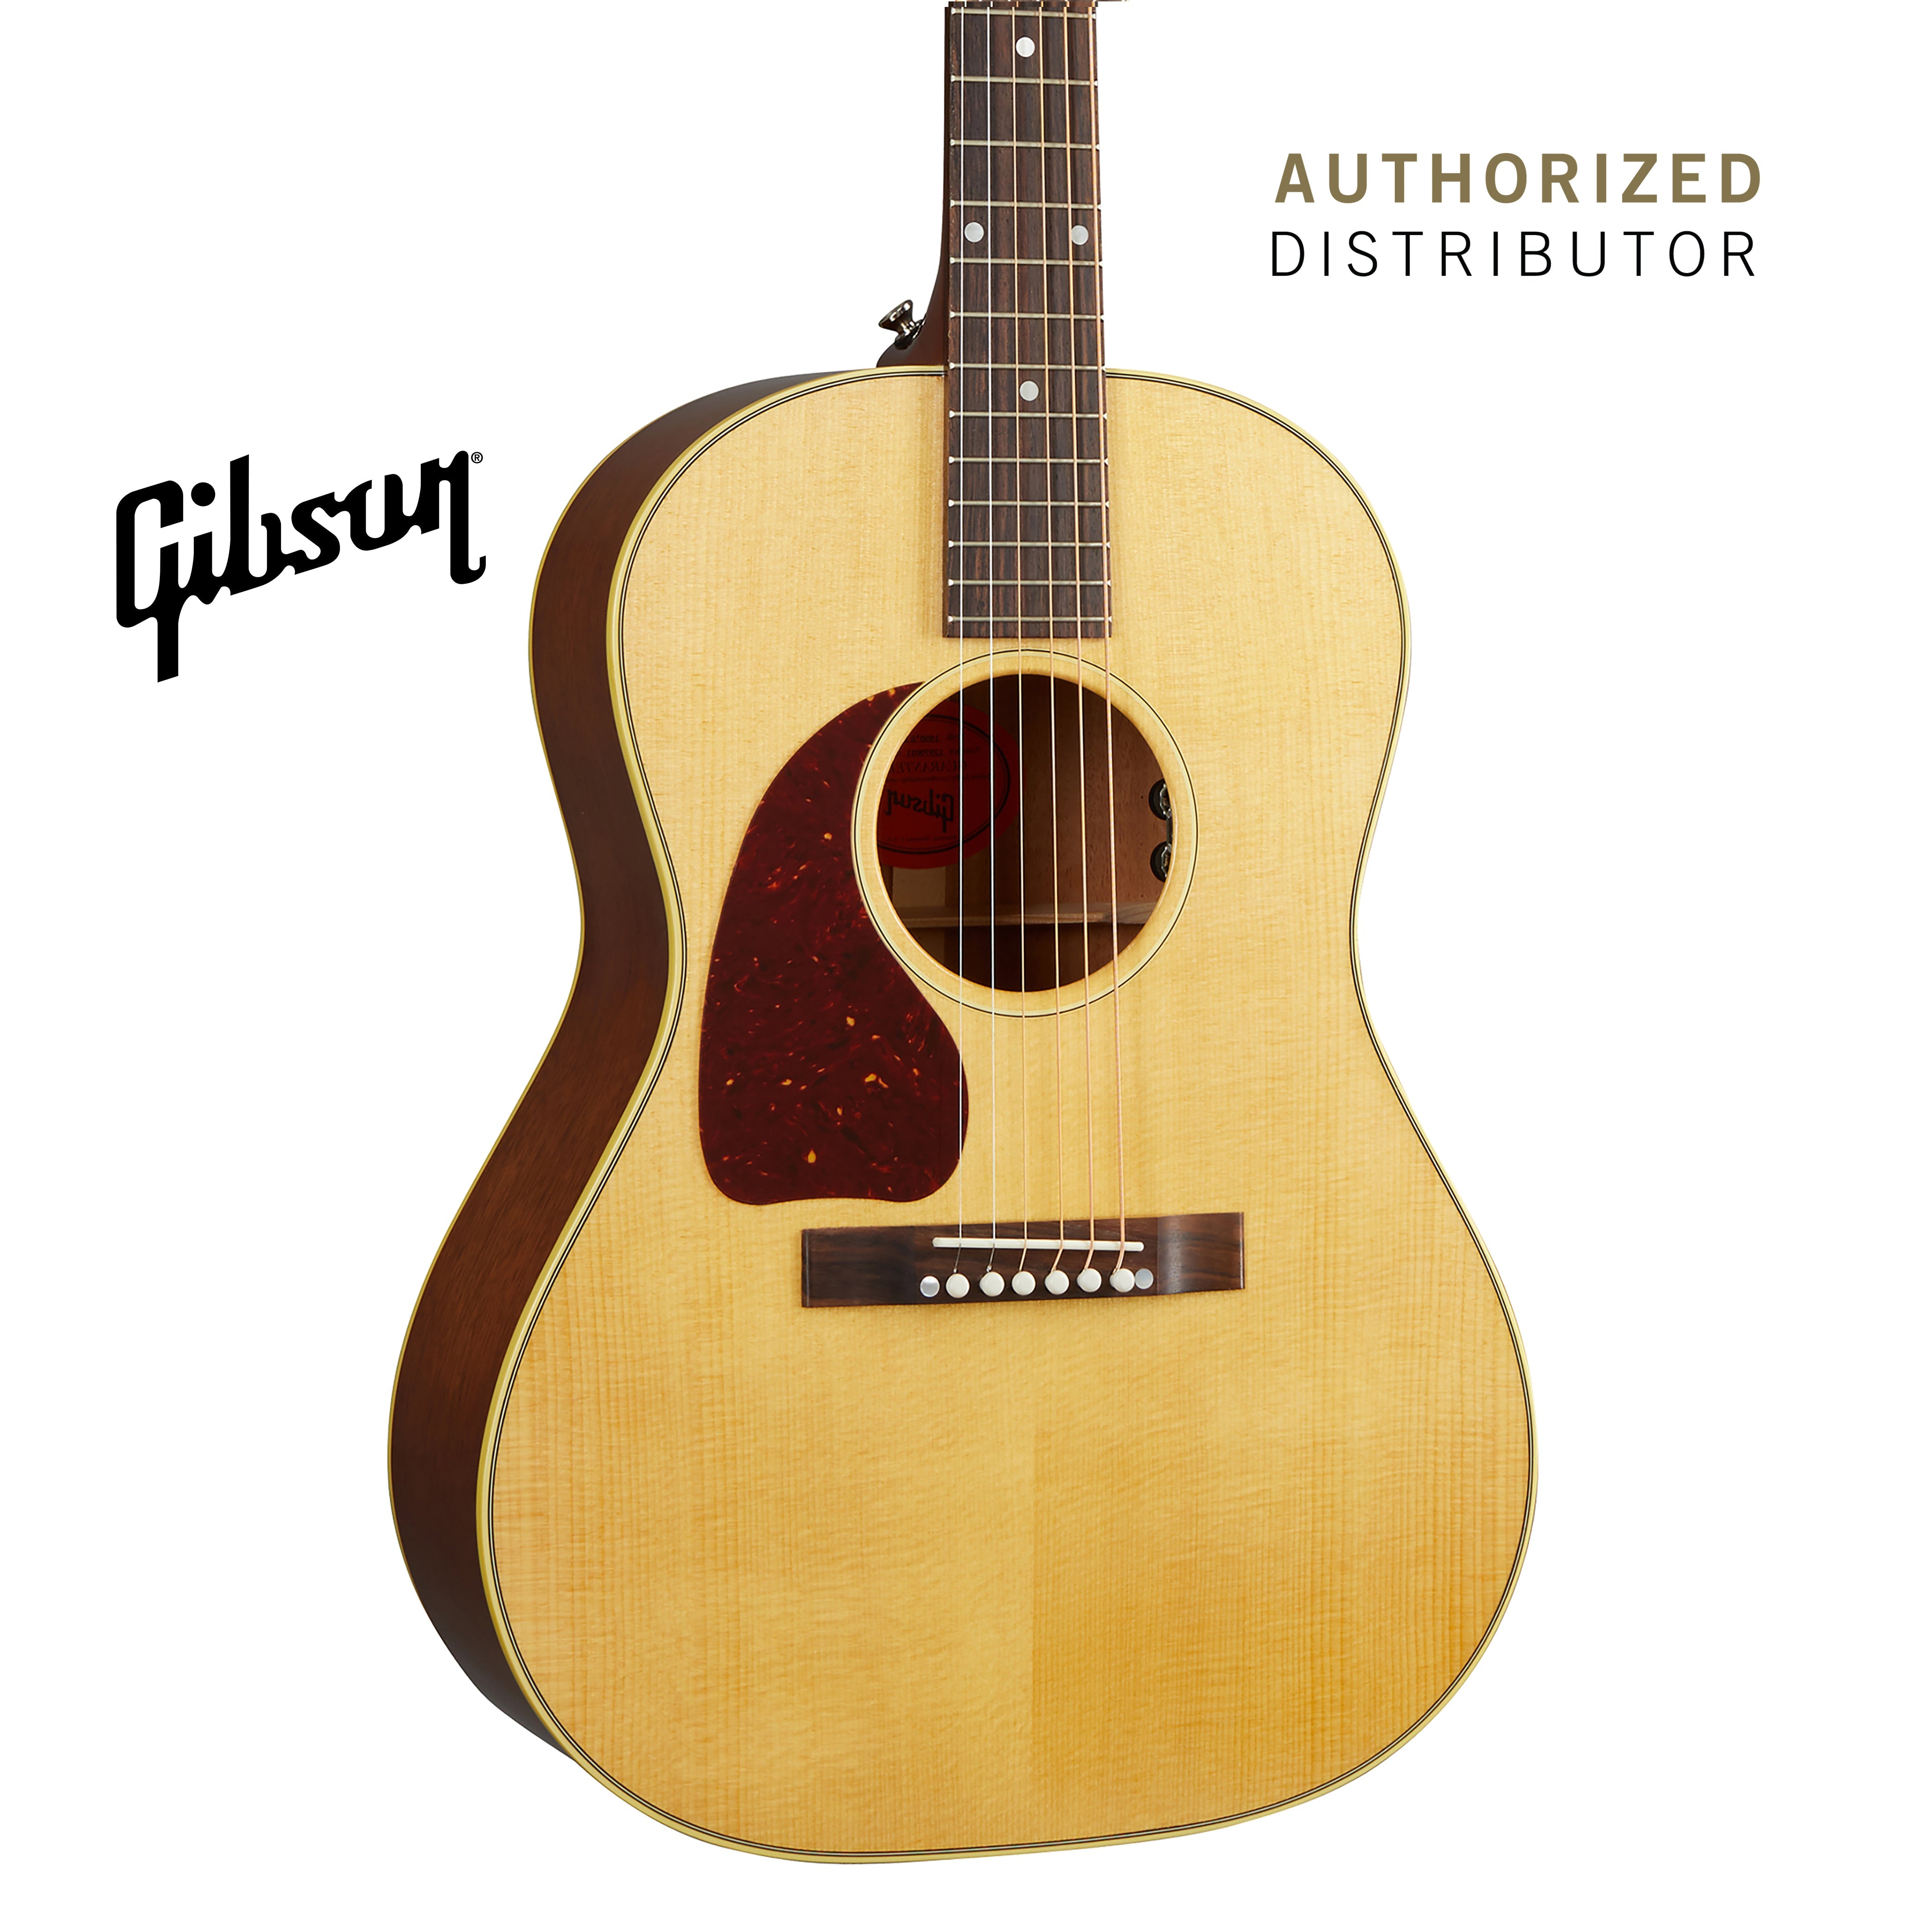 GIBSON 50S LG-2 LEFT-HANDED ACOUSTIC-ELECTRIC GUITAR - ANTIQUE NATURAL